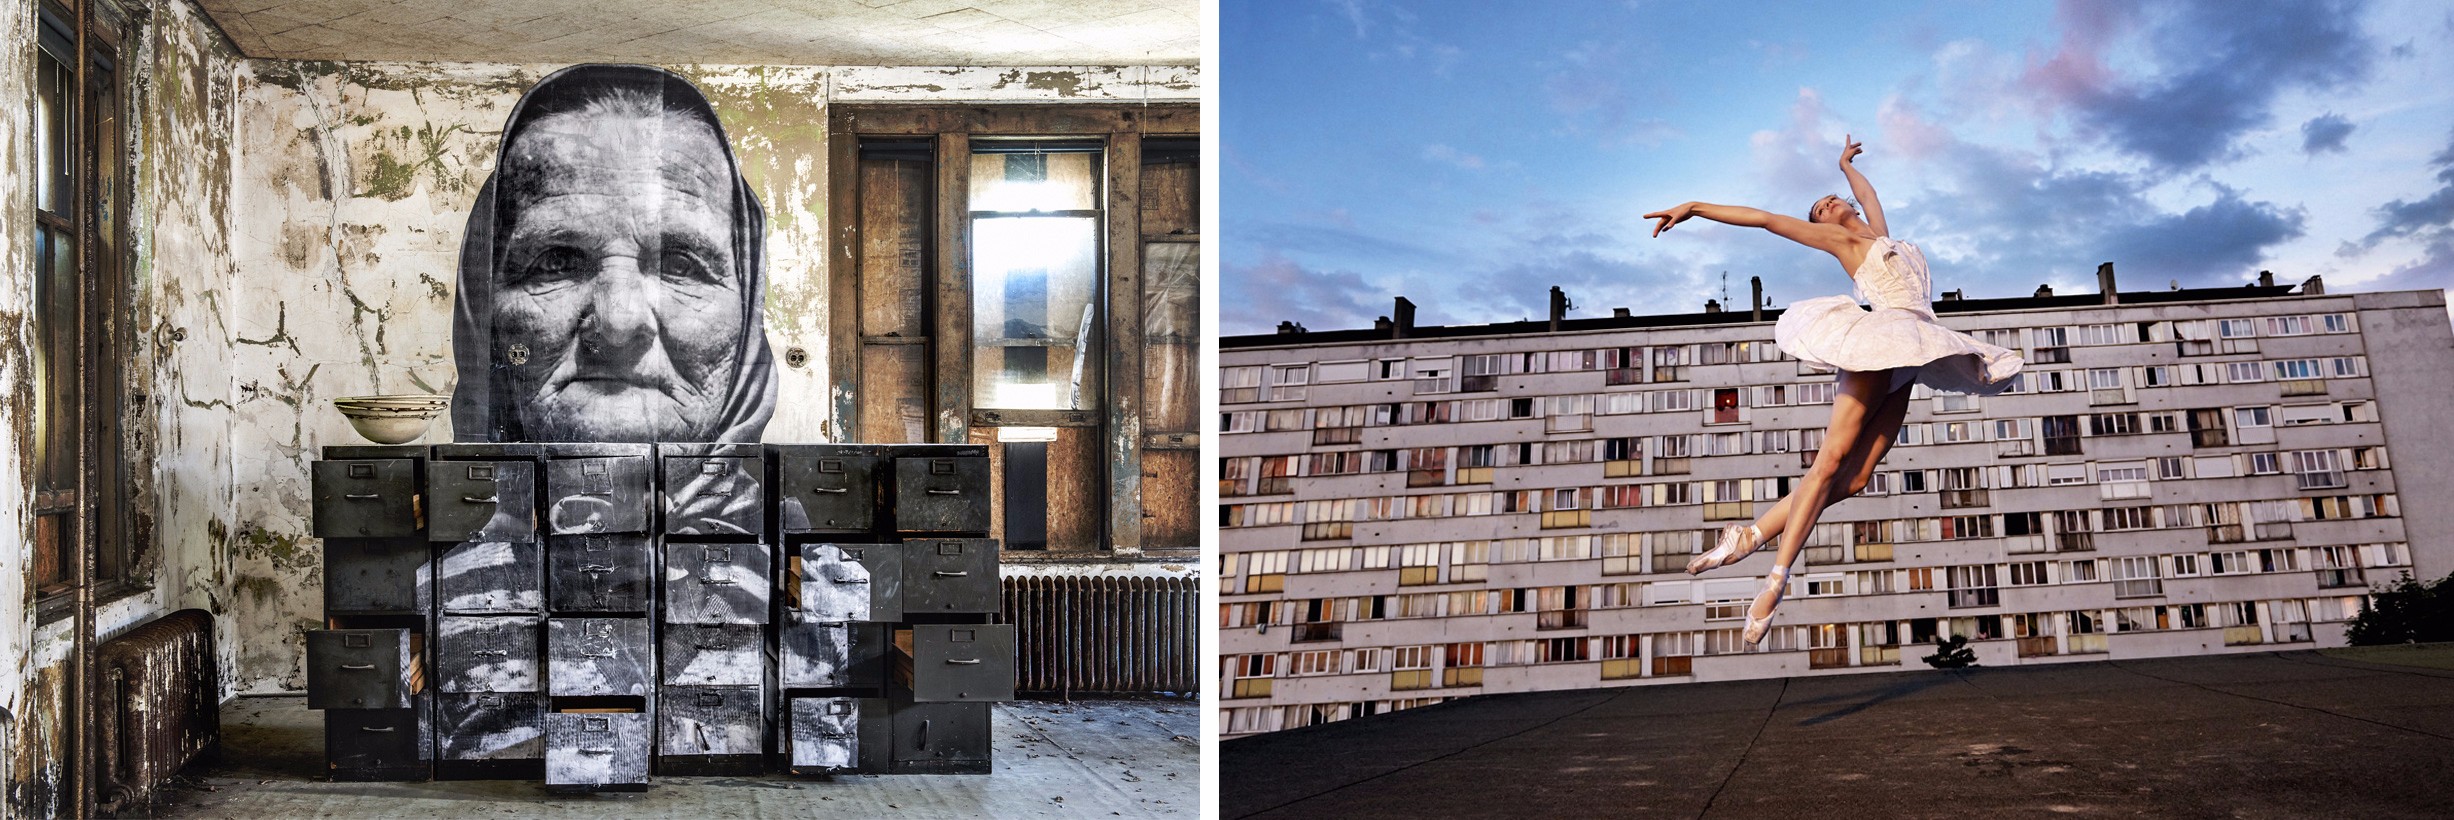 A photo from The Unframed Ellis Island Project (left) and the Les Bosquets series by JR.